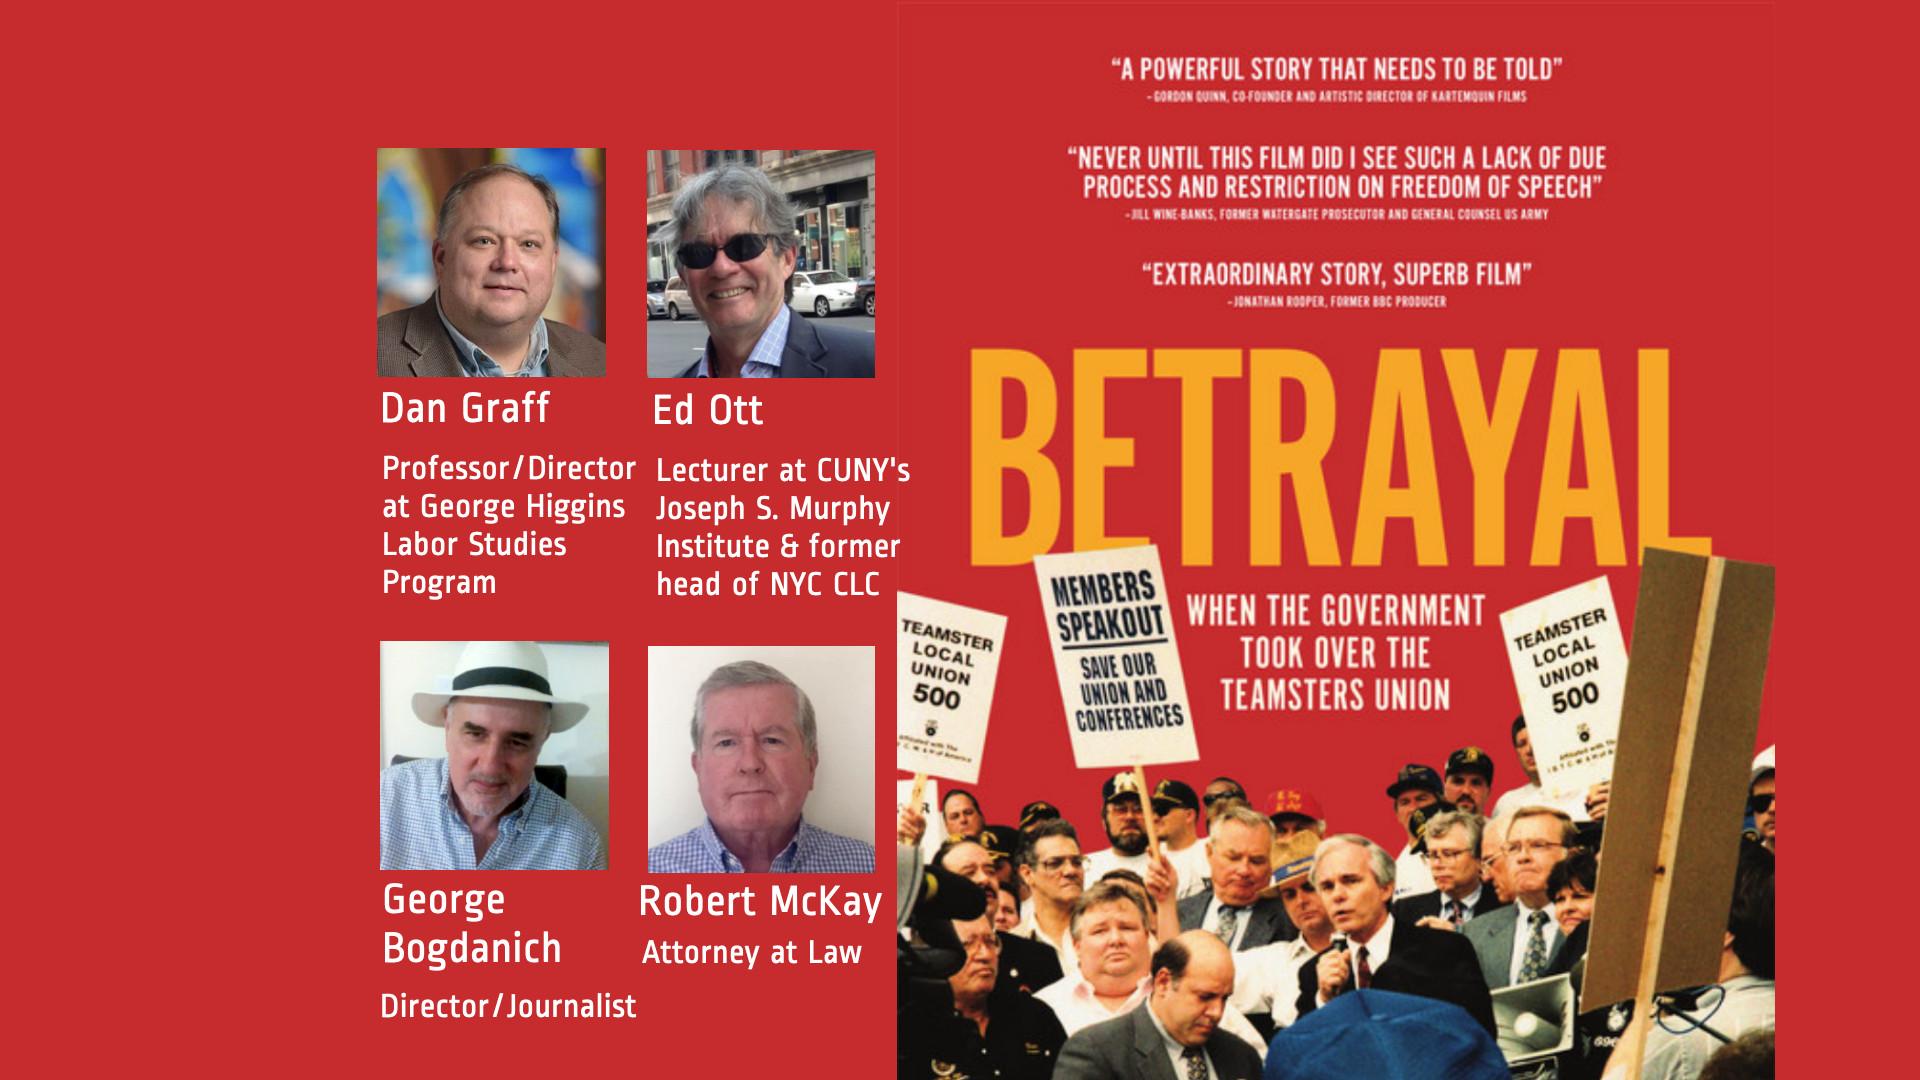 Betrayal: When the Government Took Over the Teamsters Union - Q&A Panel Oct 17th